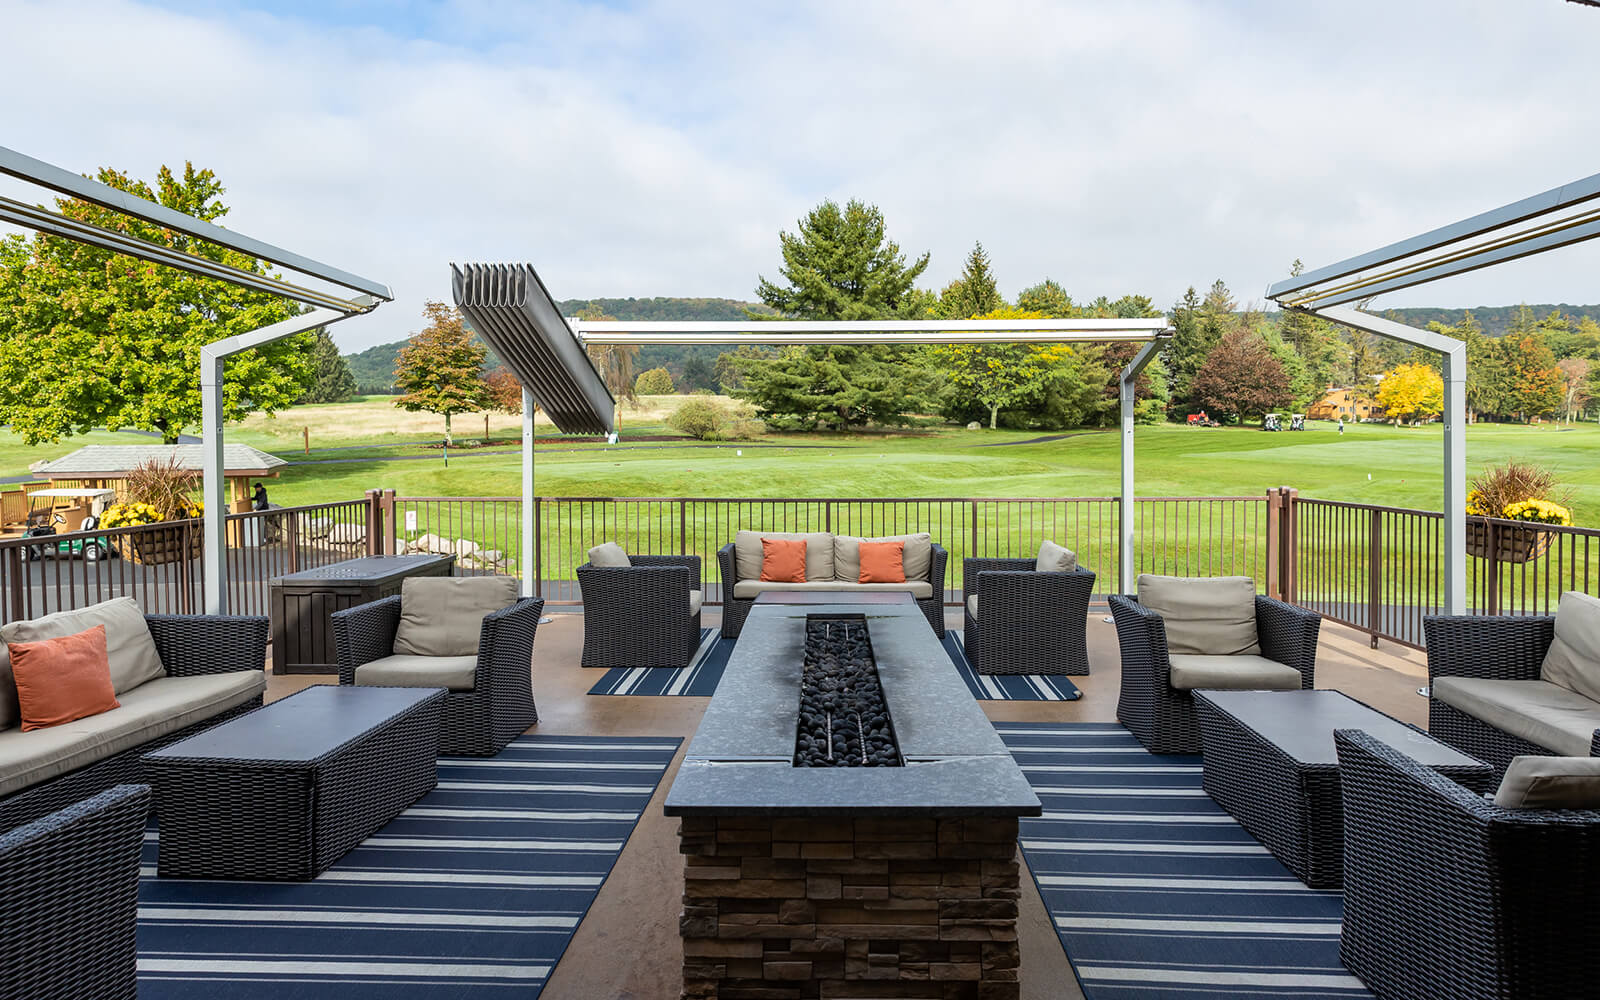 Outdoor furniture on a patio overlooking grass